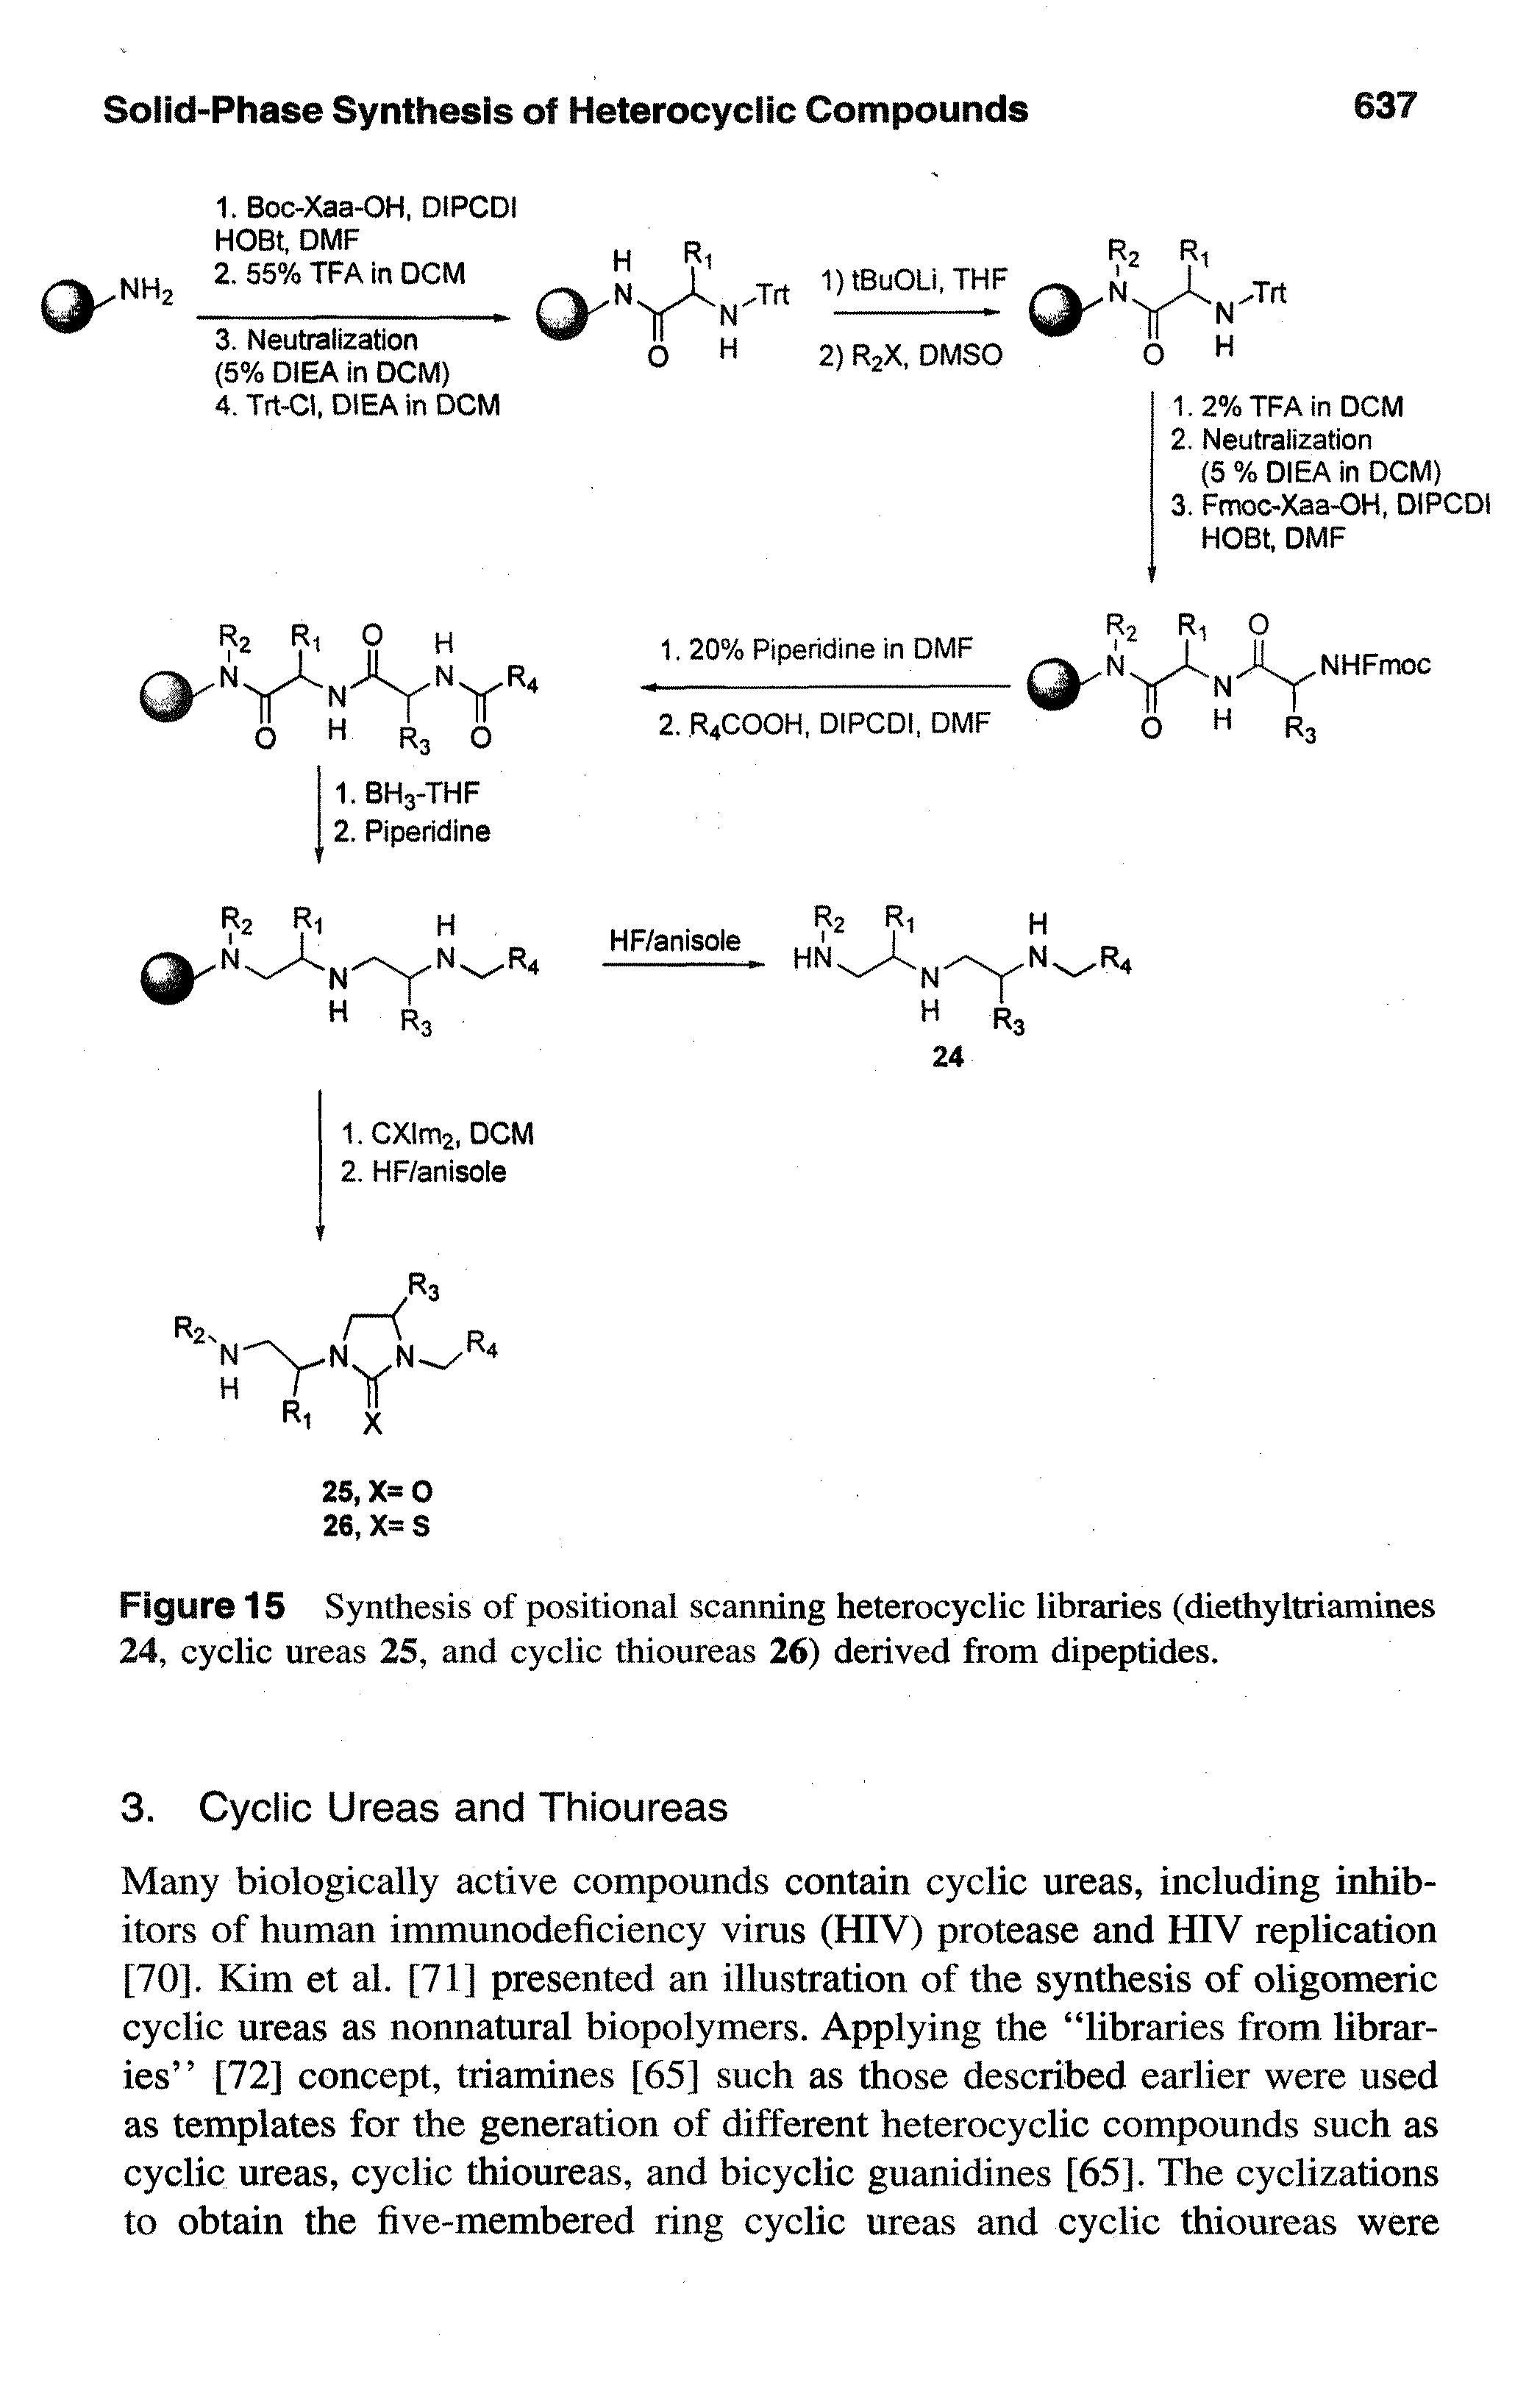 Figure 15 Synthesis of positional scanning heterocyclic libraries (diethyltriamines 24, cyclic ureas 25, and cyclic thioureas 26) derived from dipeptides.